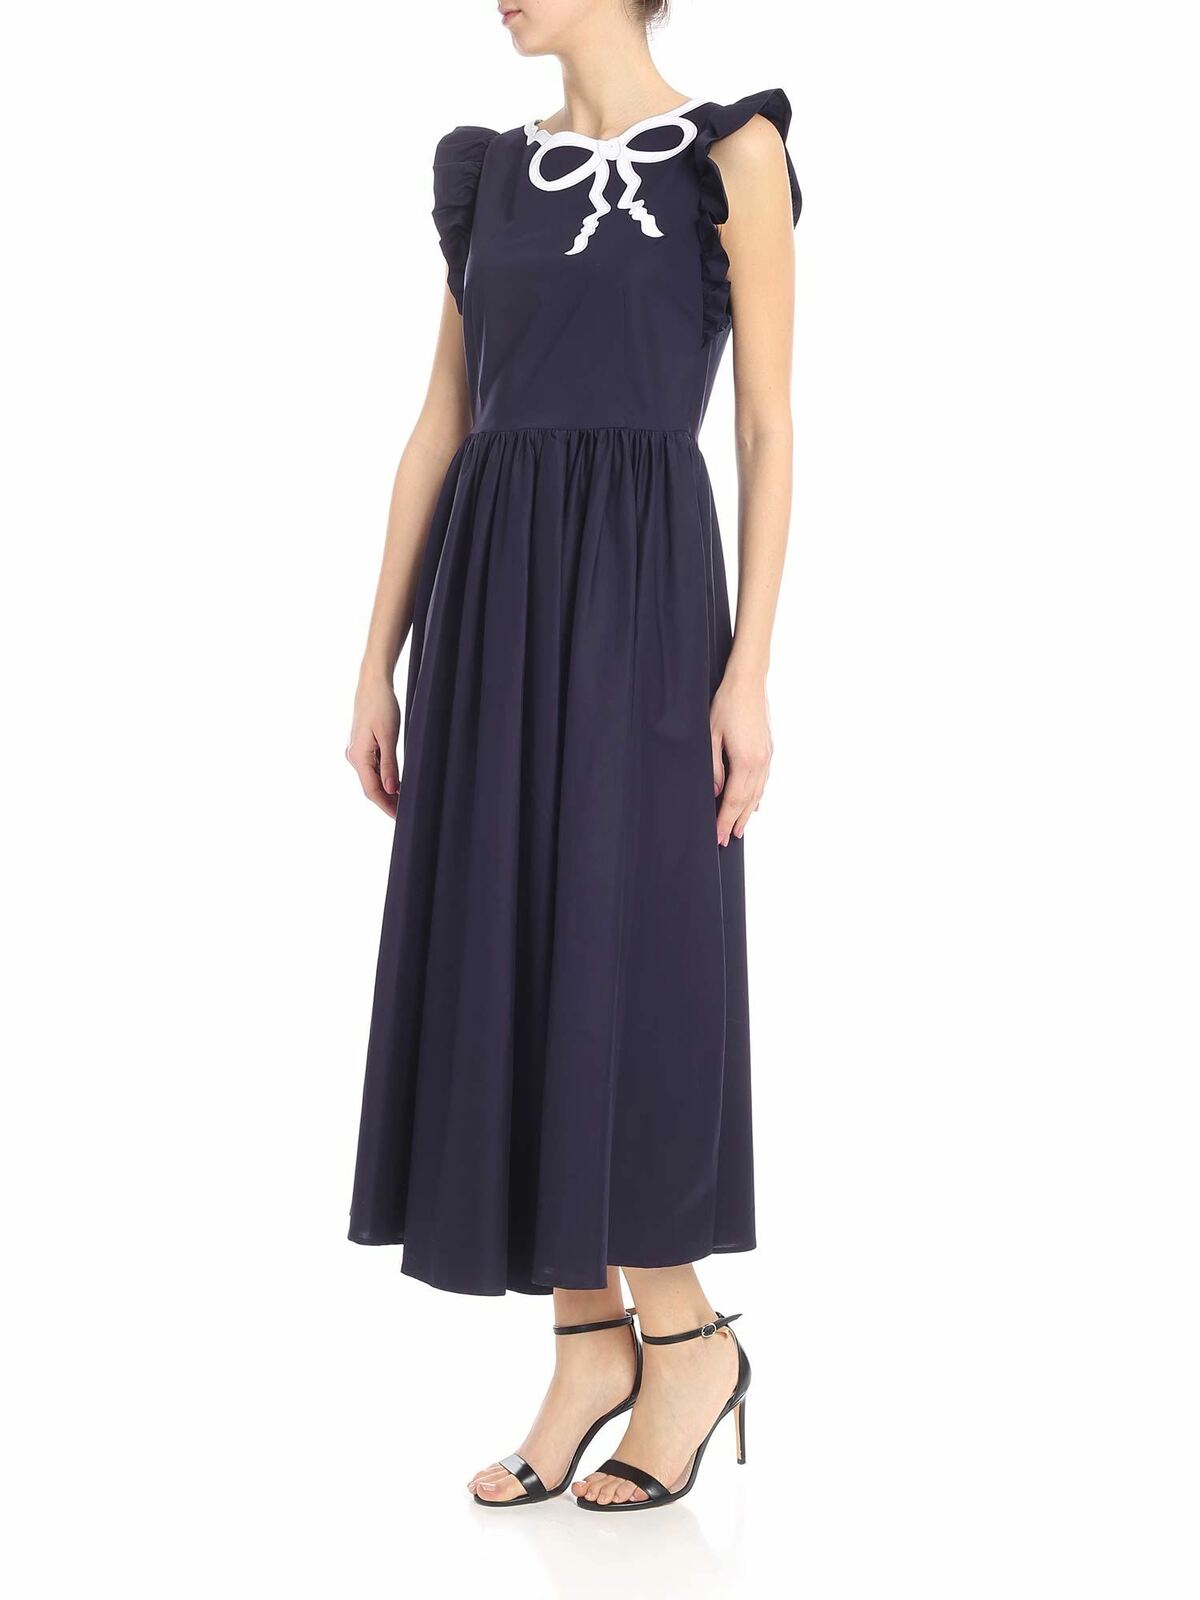 Maxi dresses Vivetta - Sona dress in blue with white bow embroidery -  91VP5687098